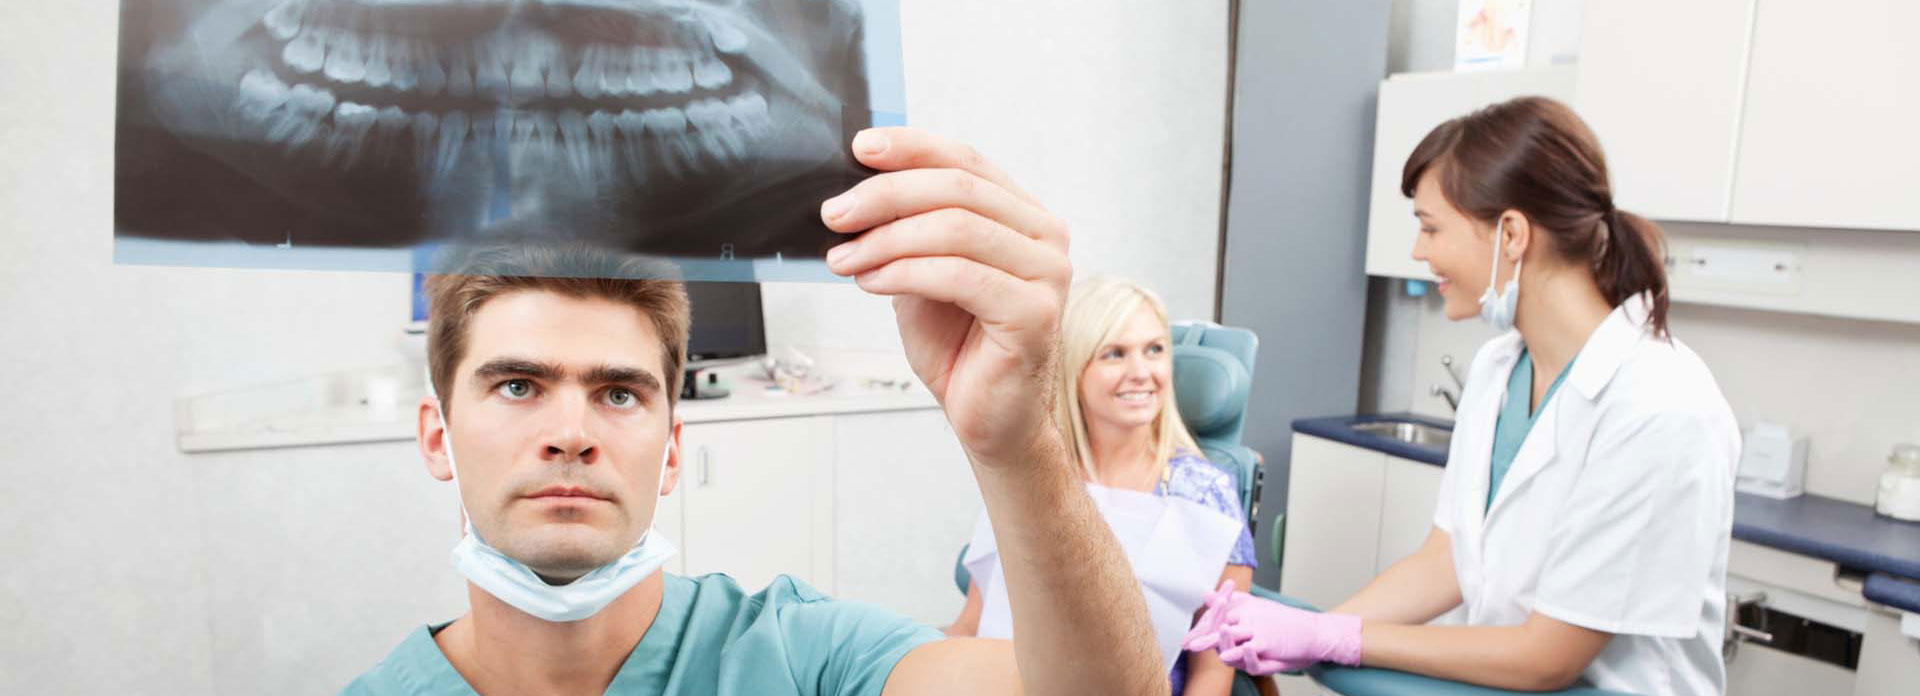 A dentist holding a tooth x-ray below a light source